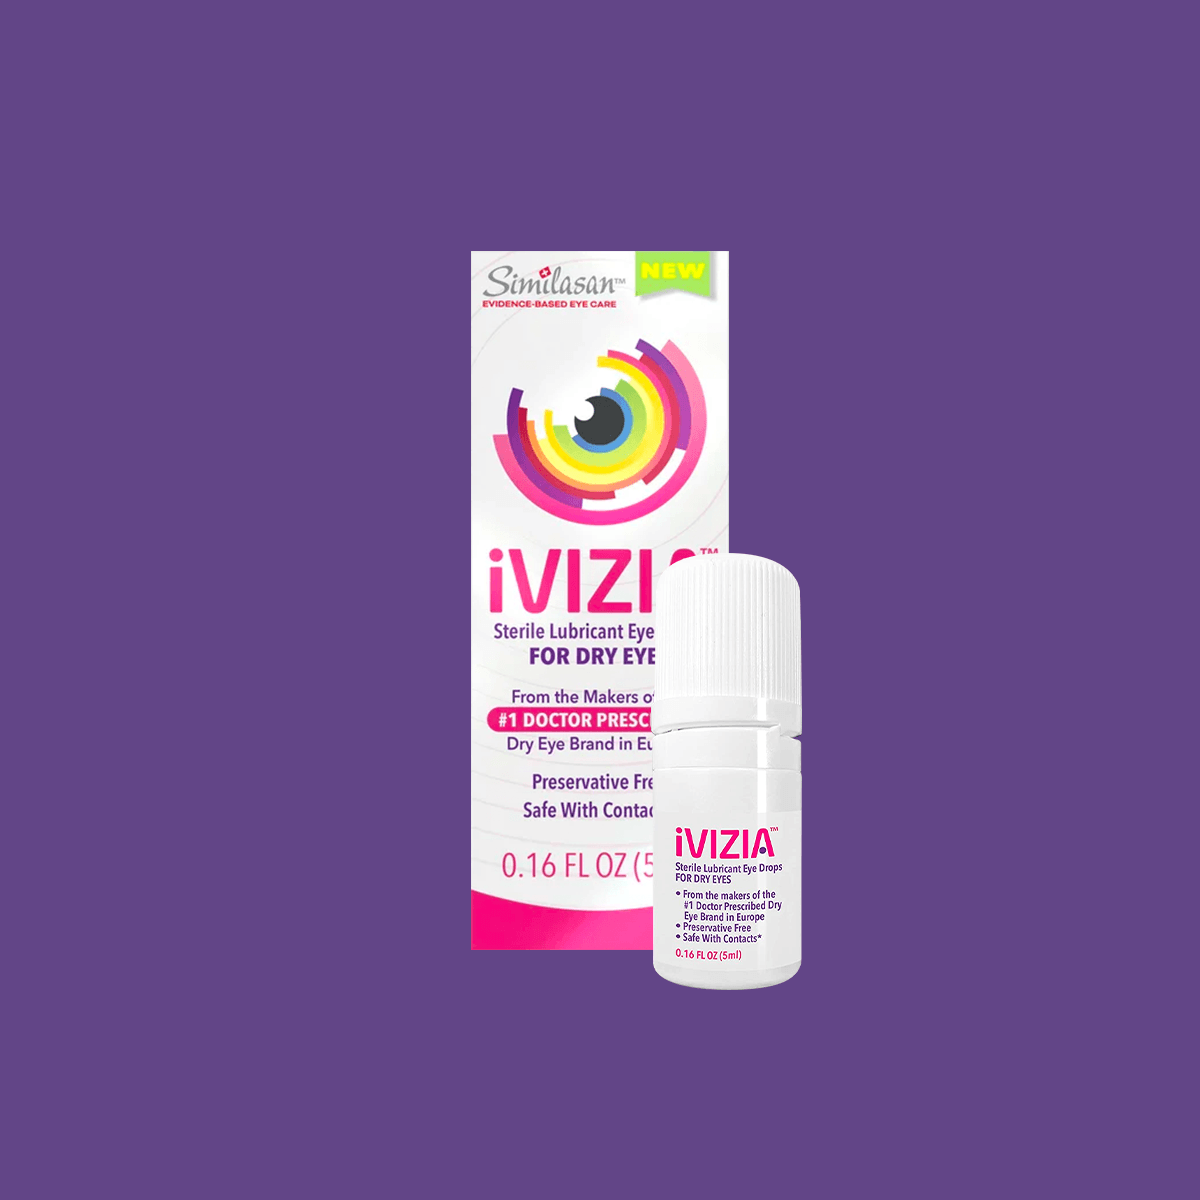 iVIZIA Sterile Lubricant Eye Drops for Dry Eyes, Preservative-Free, Dry Eye Relief, Contact Lens Friendly, 0.17 fl oz (5ml bottle) - DryEye Rescue Store